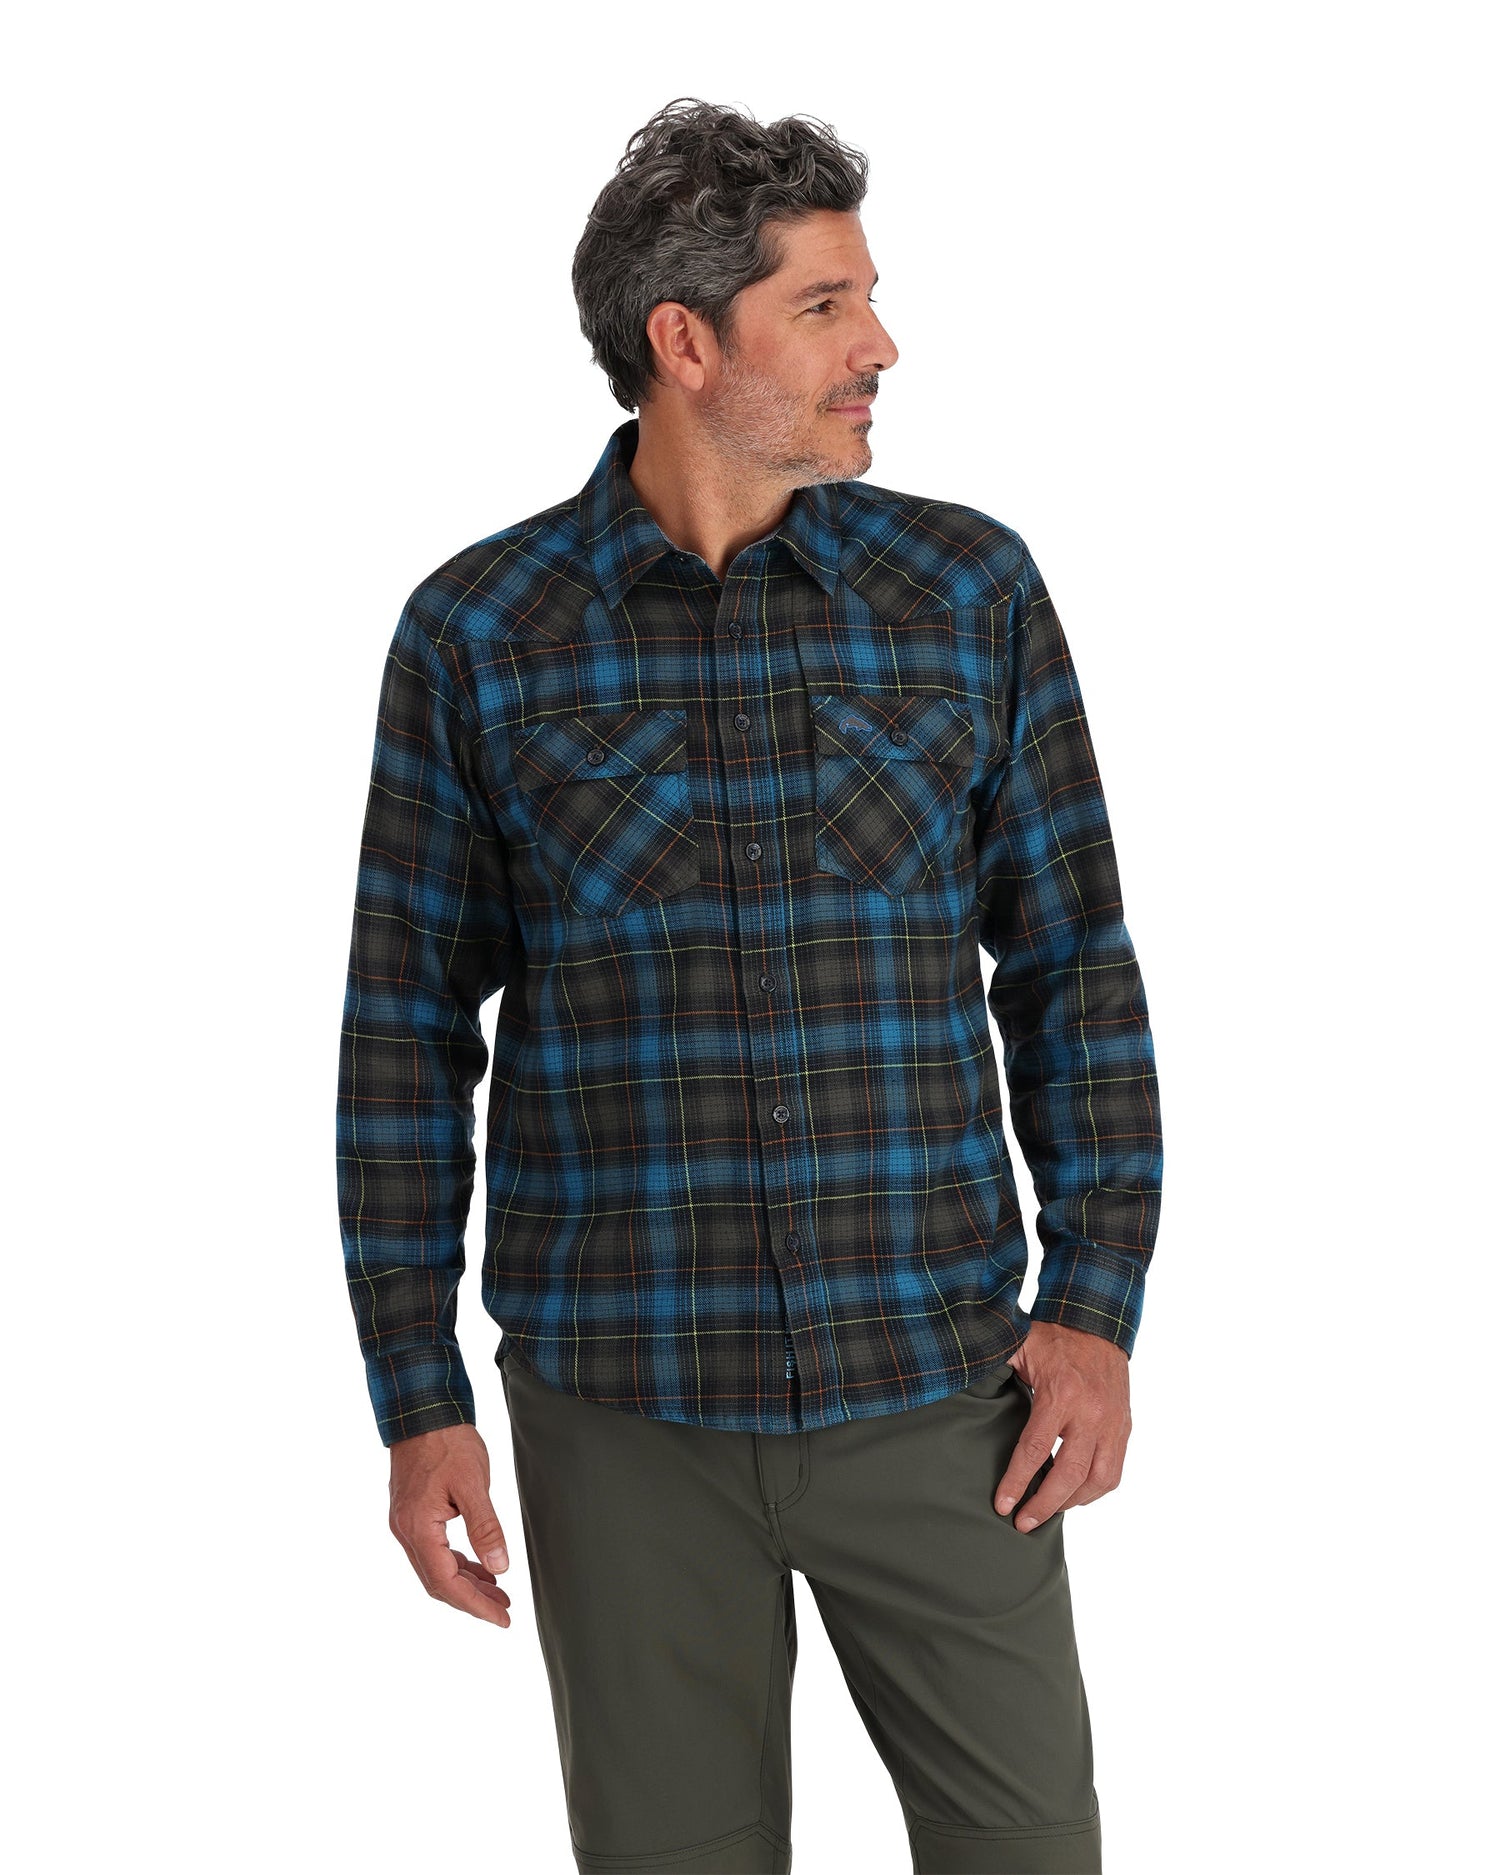     13559-1201-santee-flannel-model-f23-front -rollover